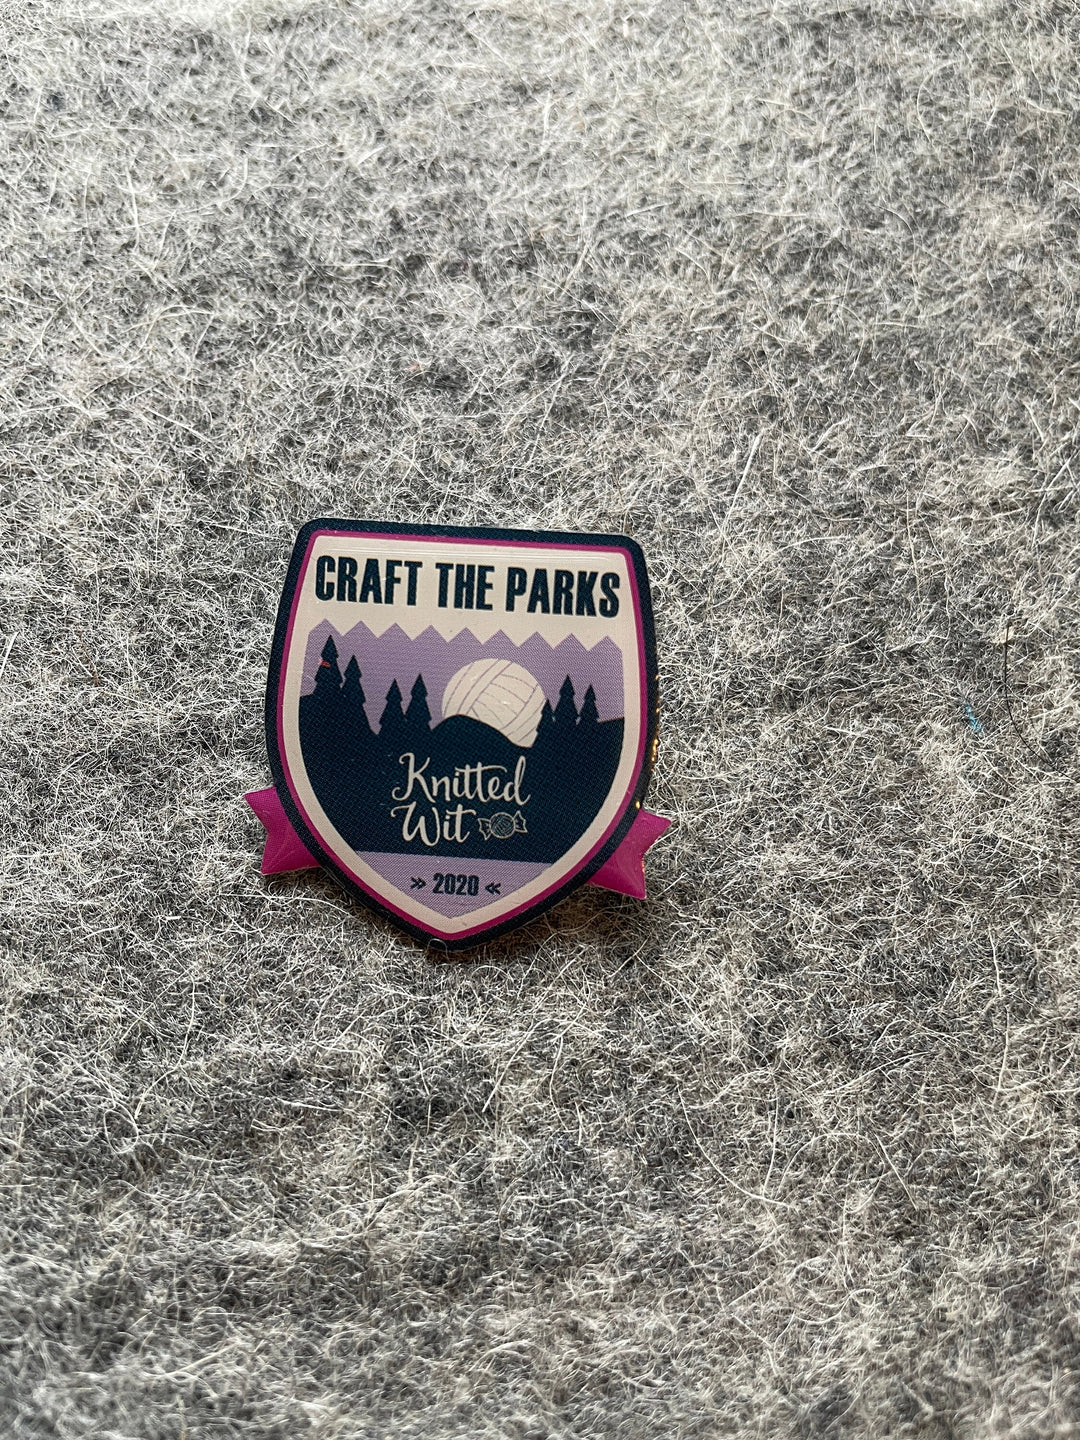 2020 Knitted Wit Craft the Parks Enamel Pin